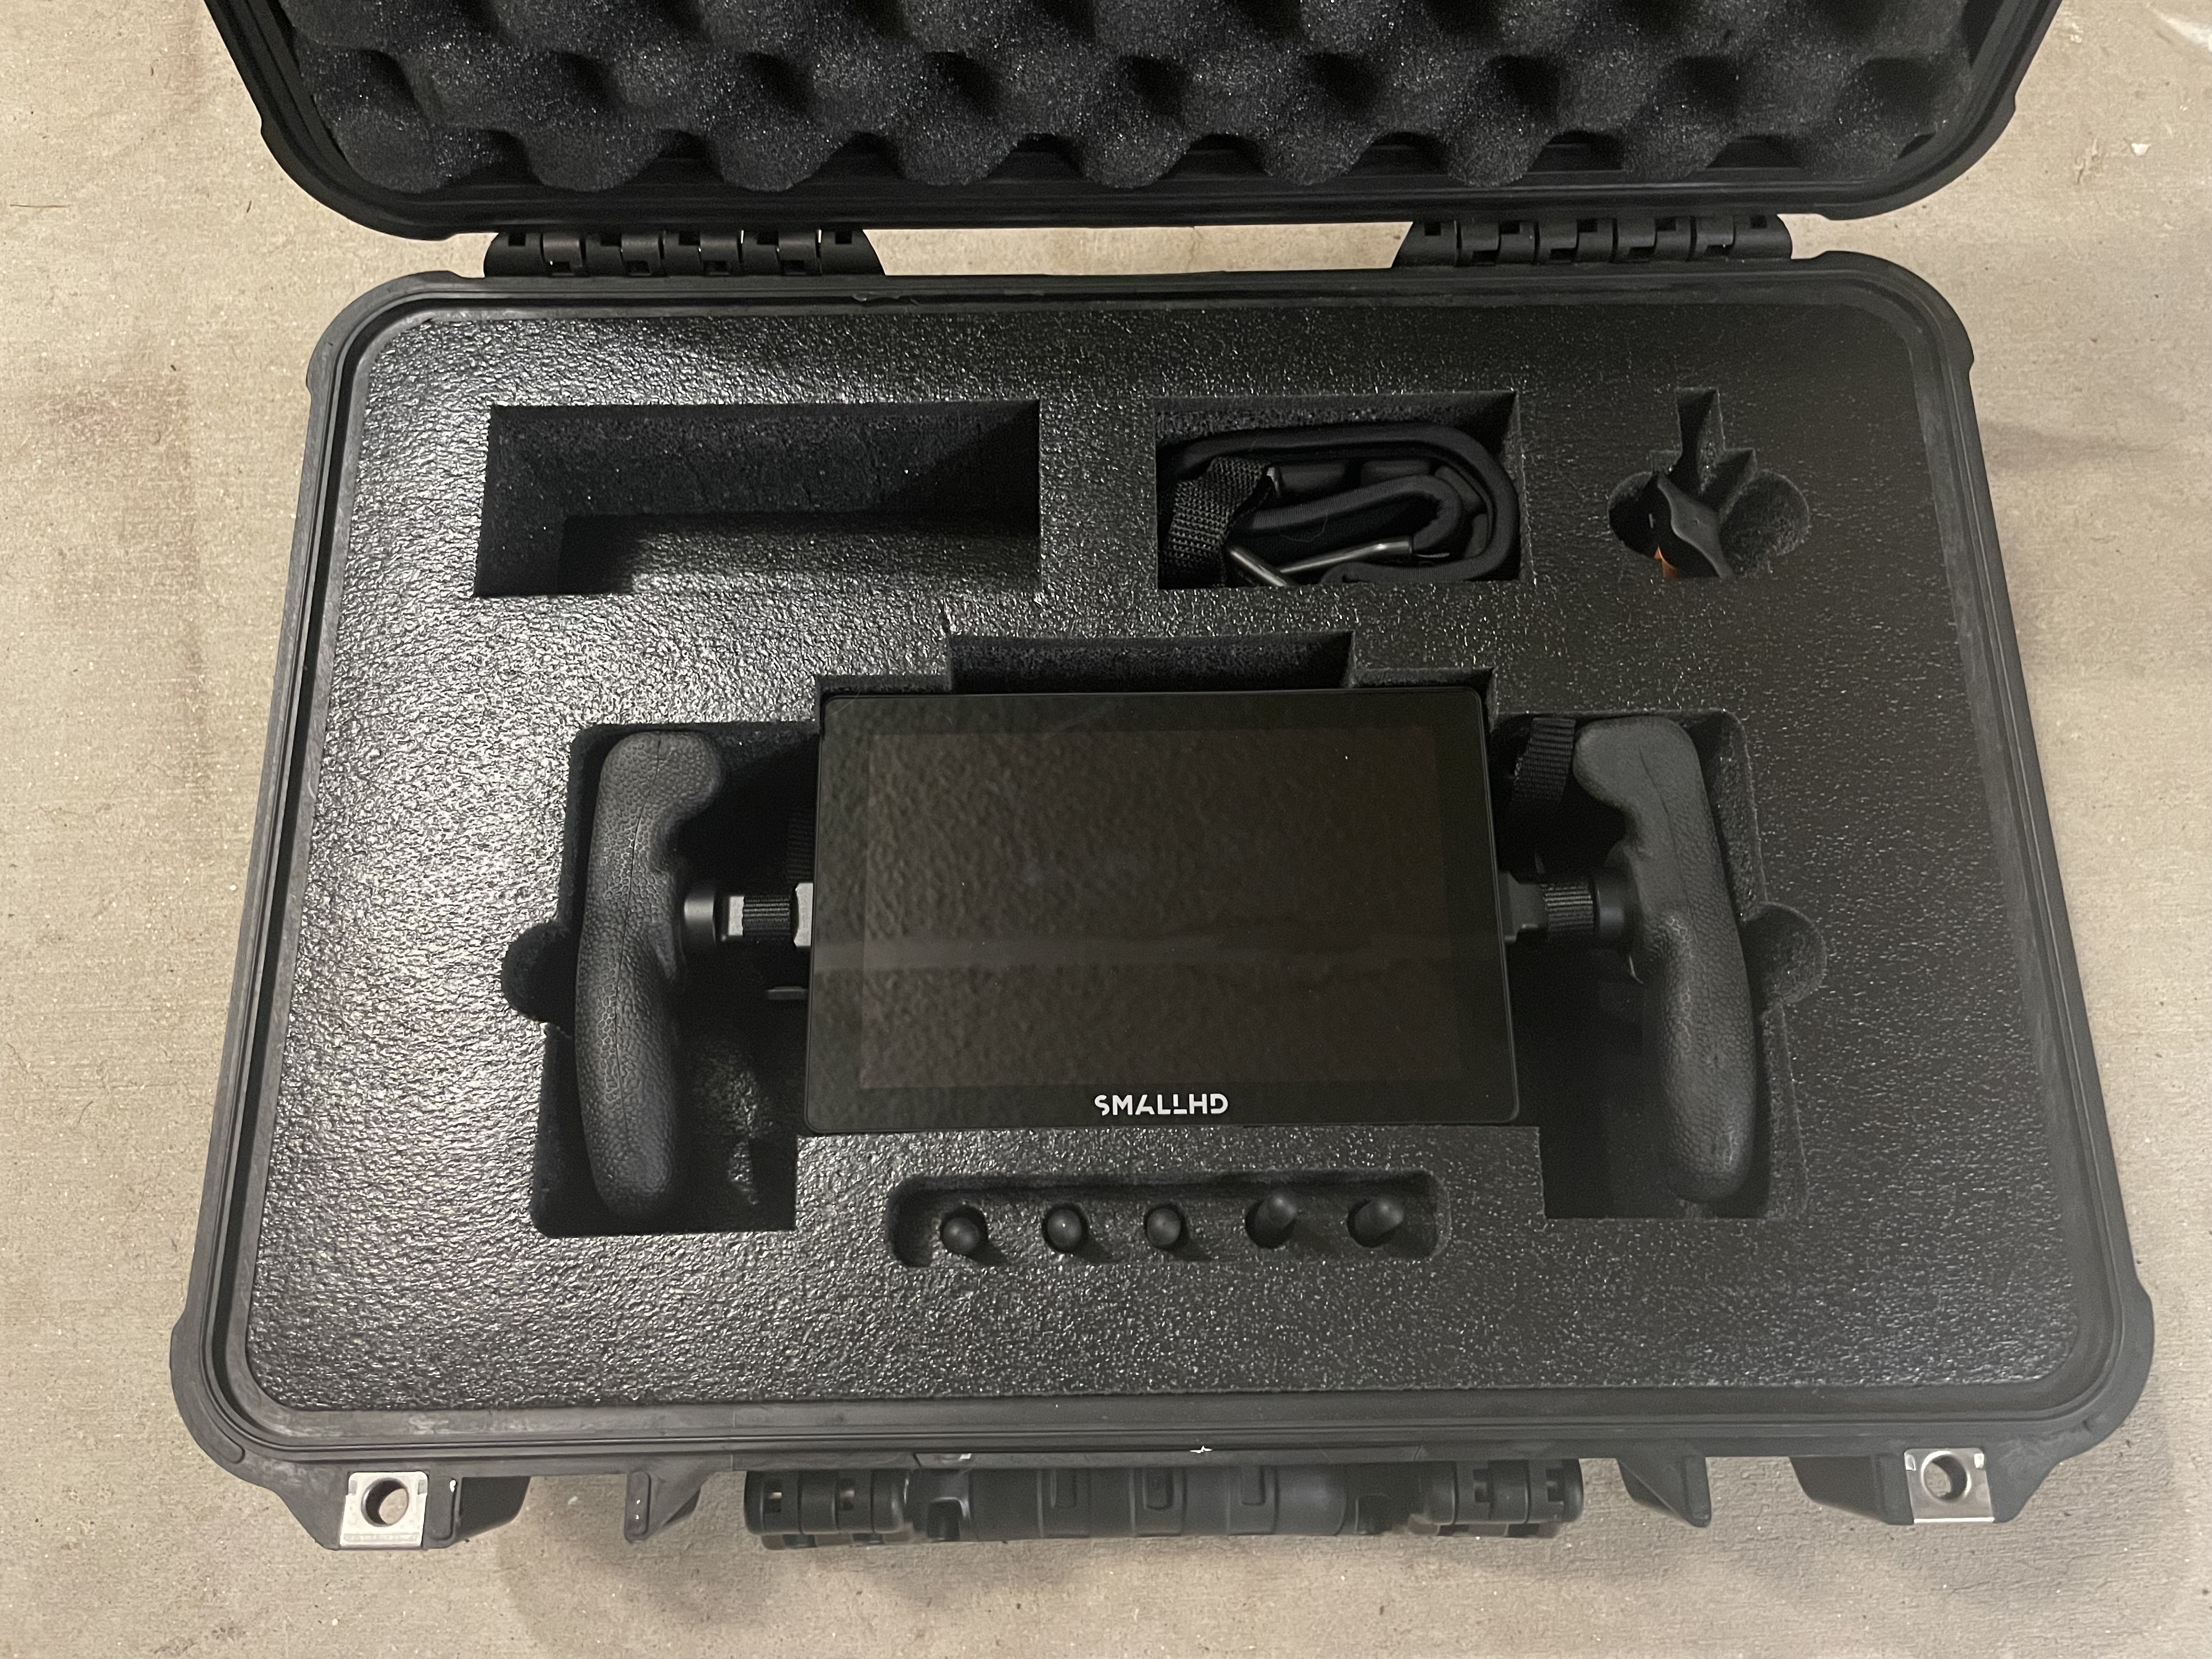 SmallHD Cine 7 Monitor with Bolt 4K Receiver and Accessories0